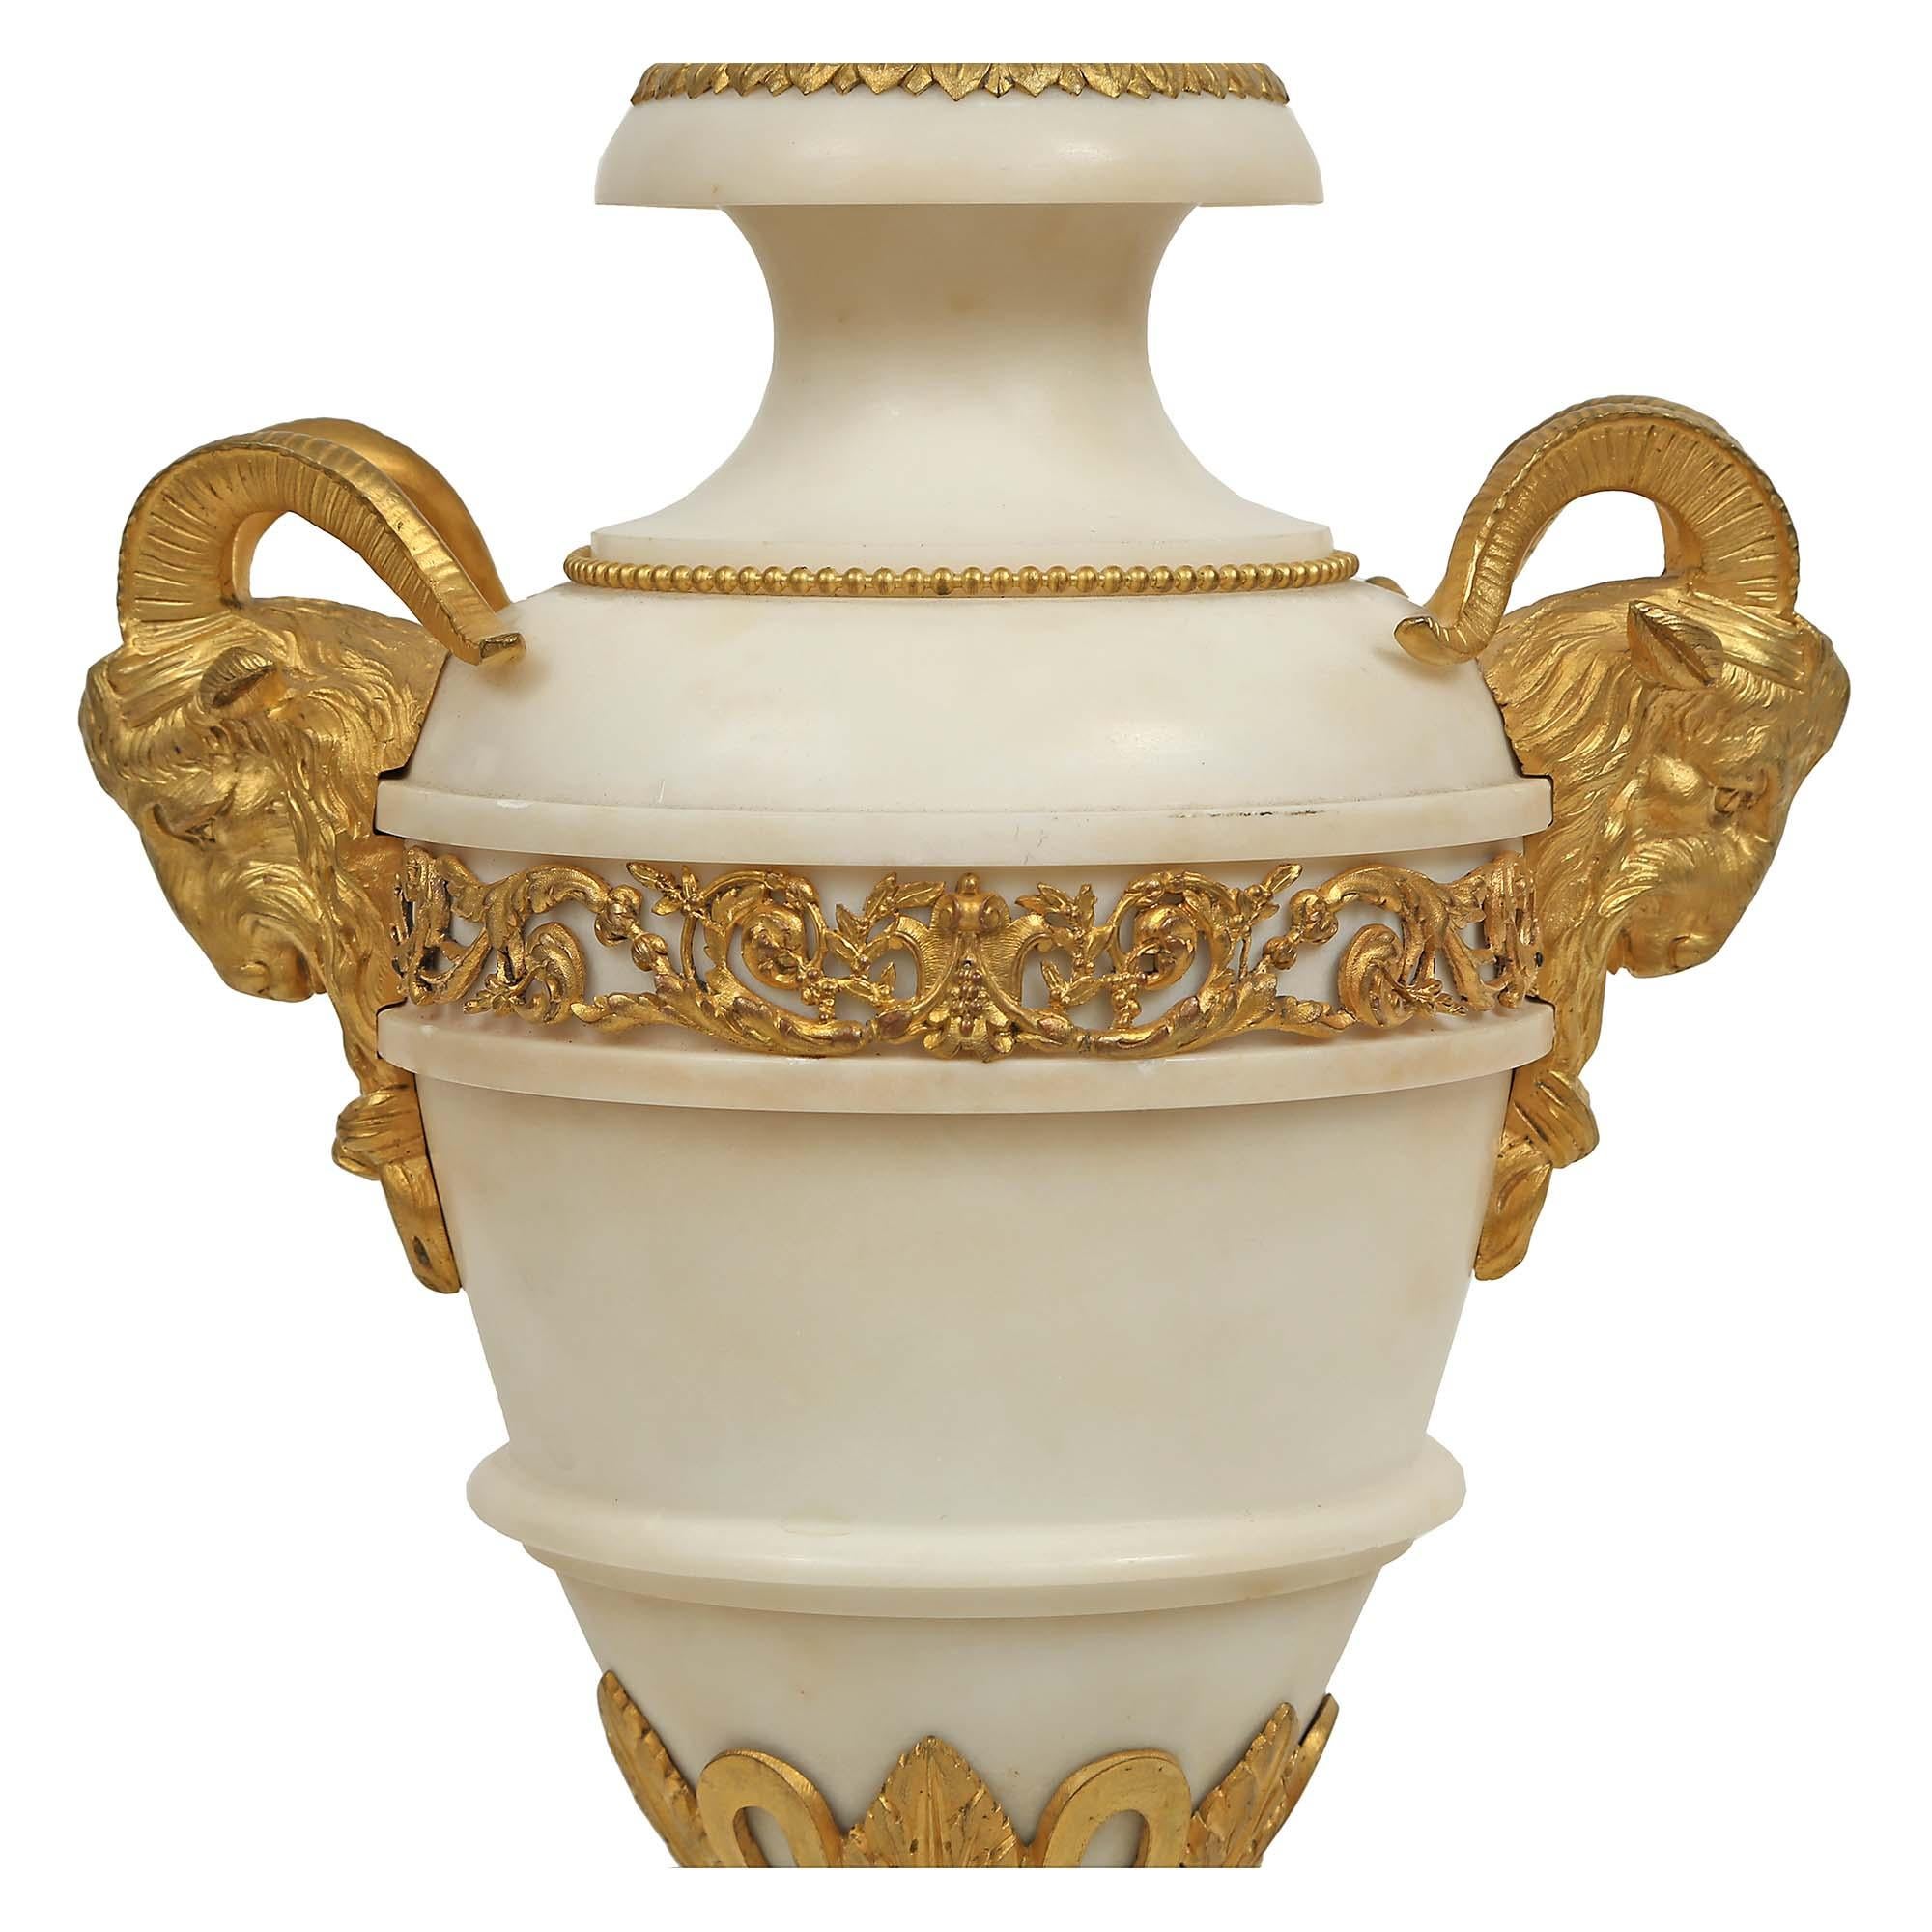 French 19th Century Louis XVI Style White Carrara Marble and Ormolu Urns For Sale 1